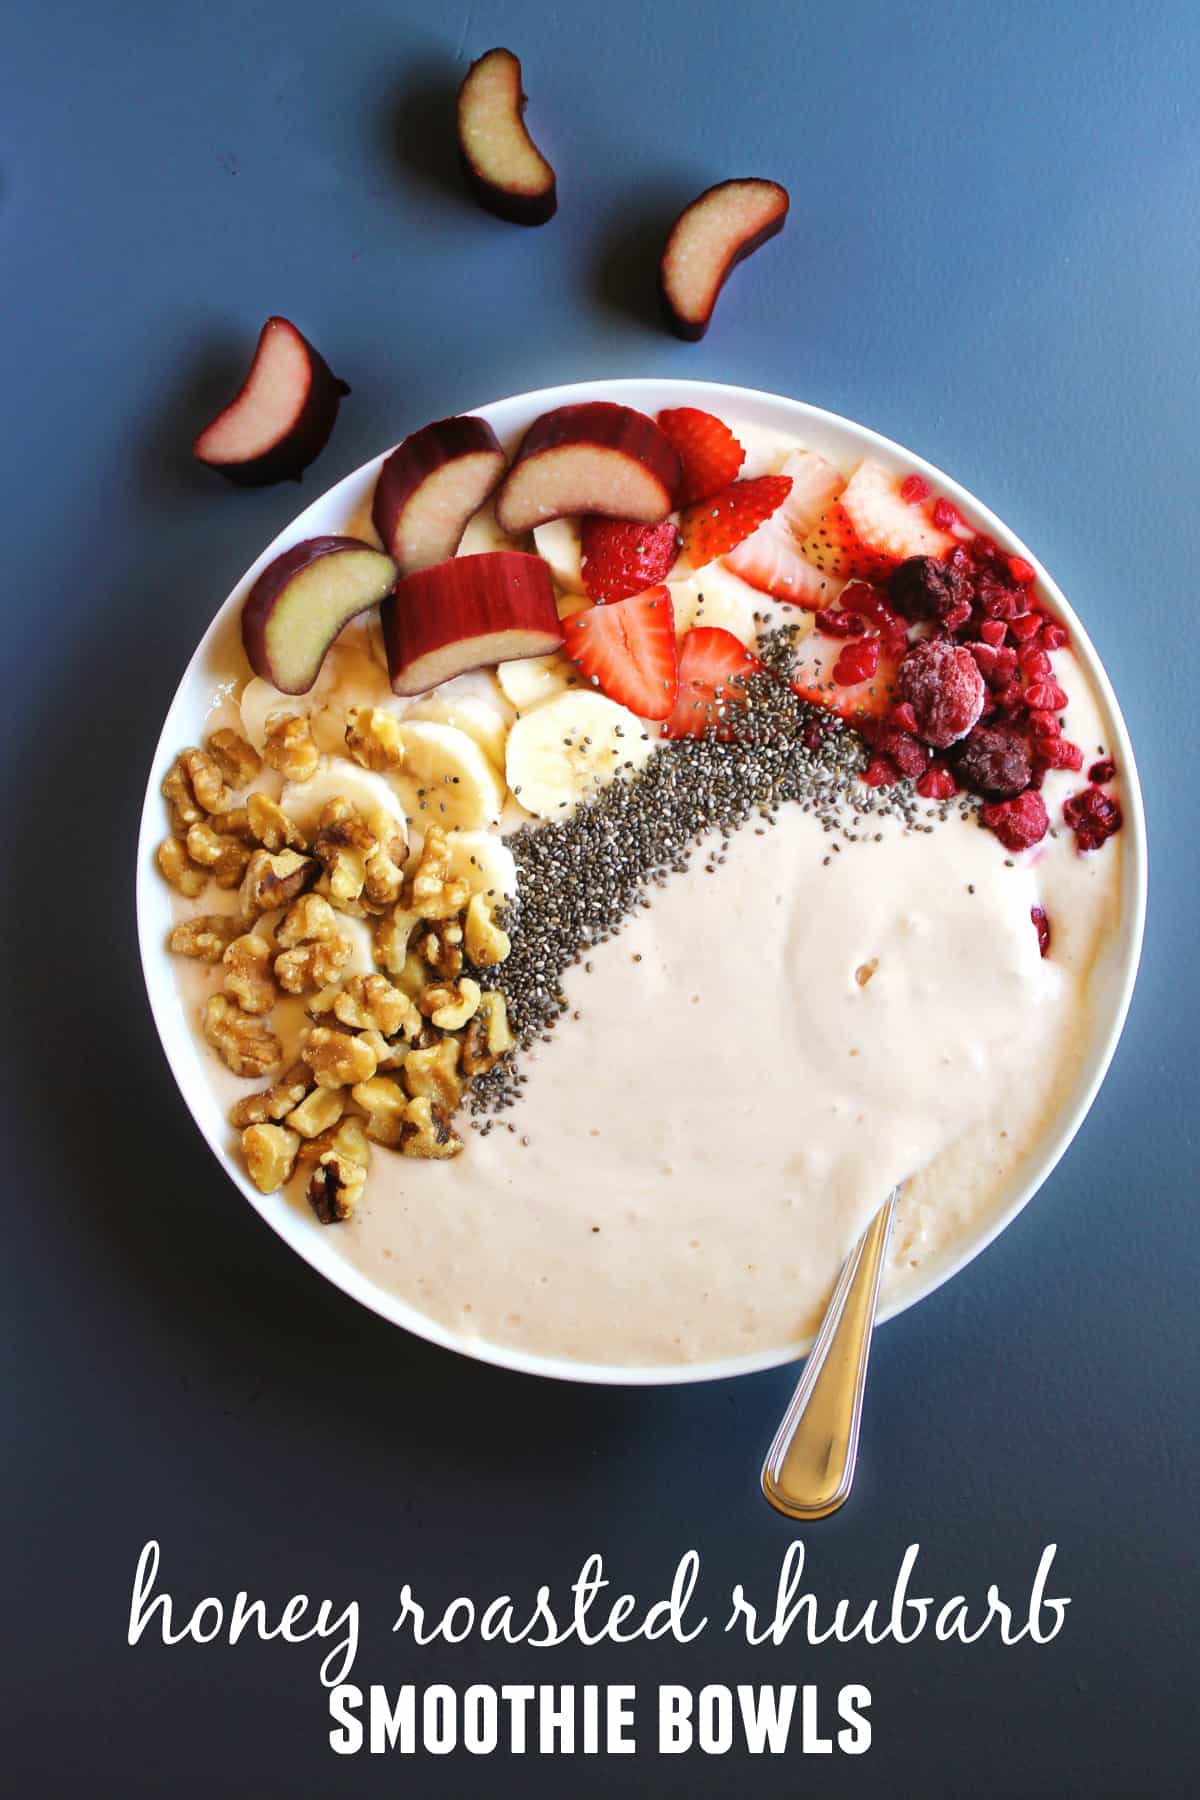 Honey roasted rhubarb smoothie bowls recipe! Tart rhubarb is roasted in sweet honey, then blended with yogurt and topped with all the smoothie bowl fixins. Such a healthy and beautiful breakfast! Vegetarian, gluten free, refined sugar free.